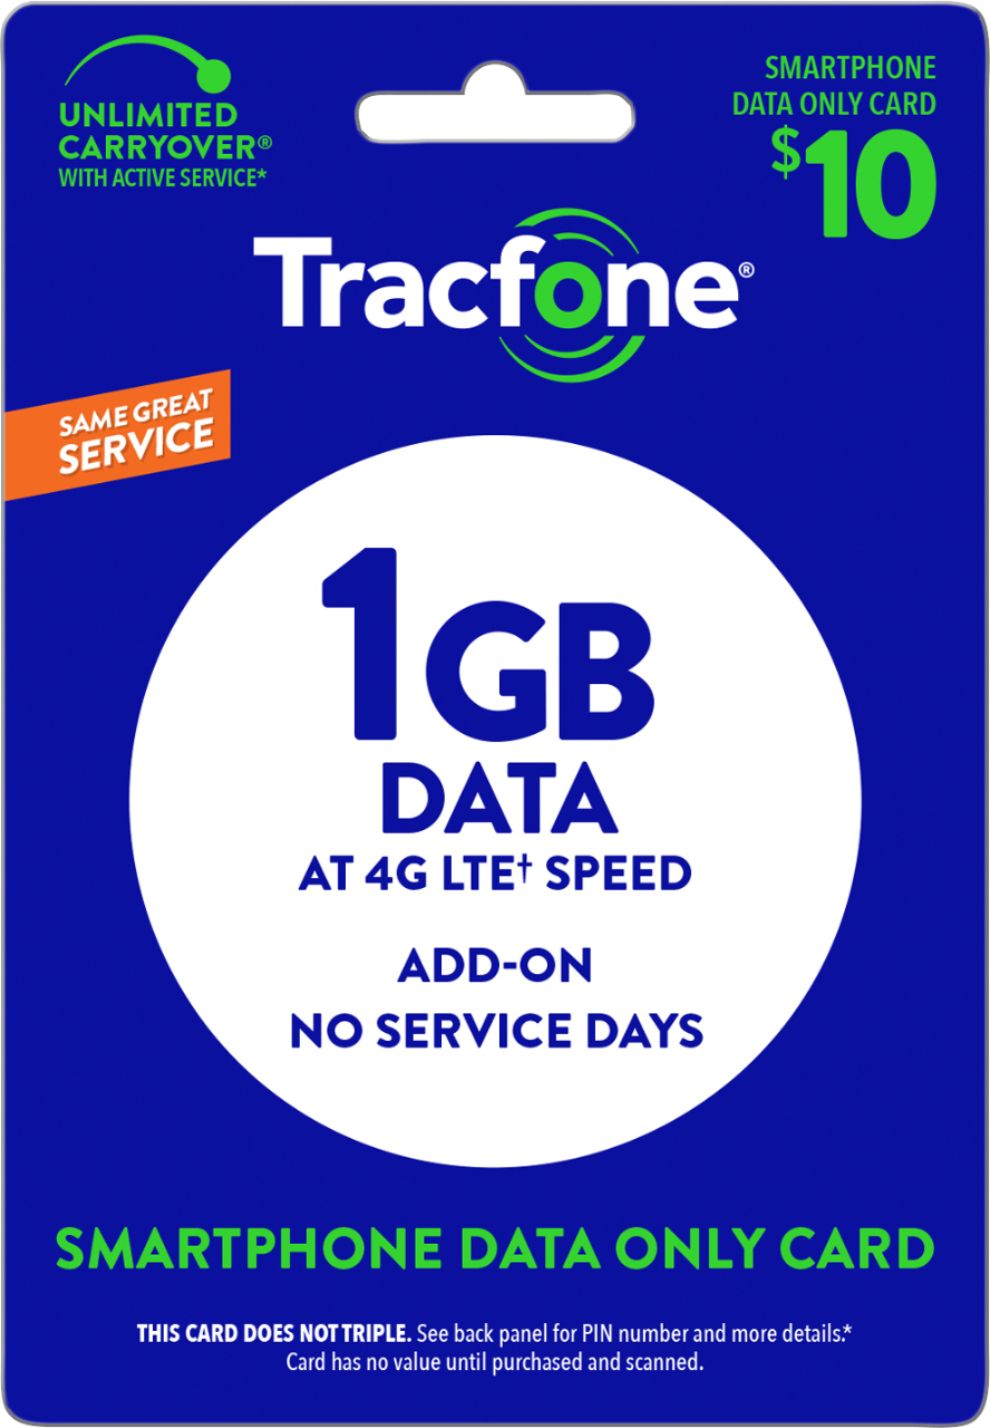 Customer Reviews Tracfone 10 Data Only Card Tracfone V18 1gb Data 10